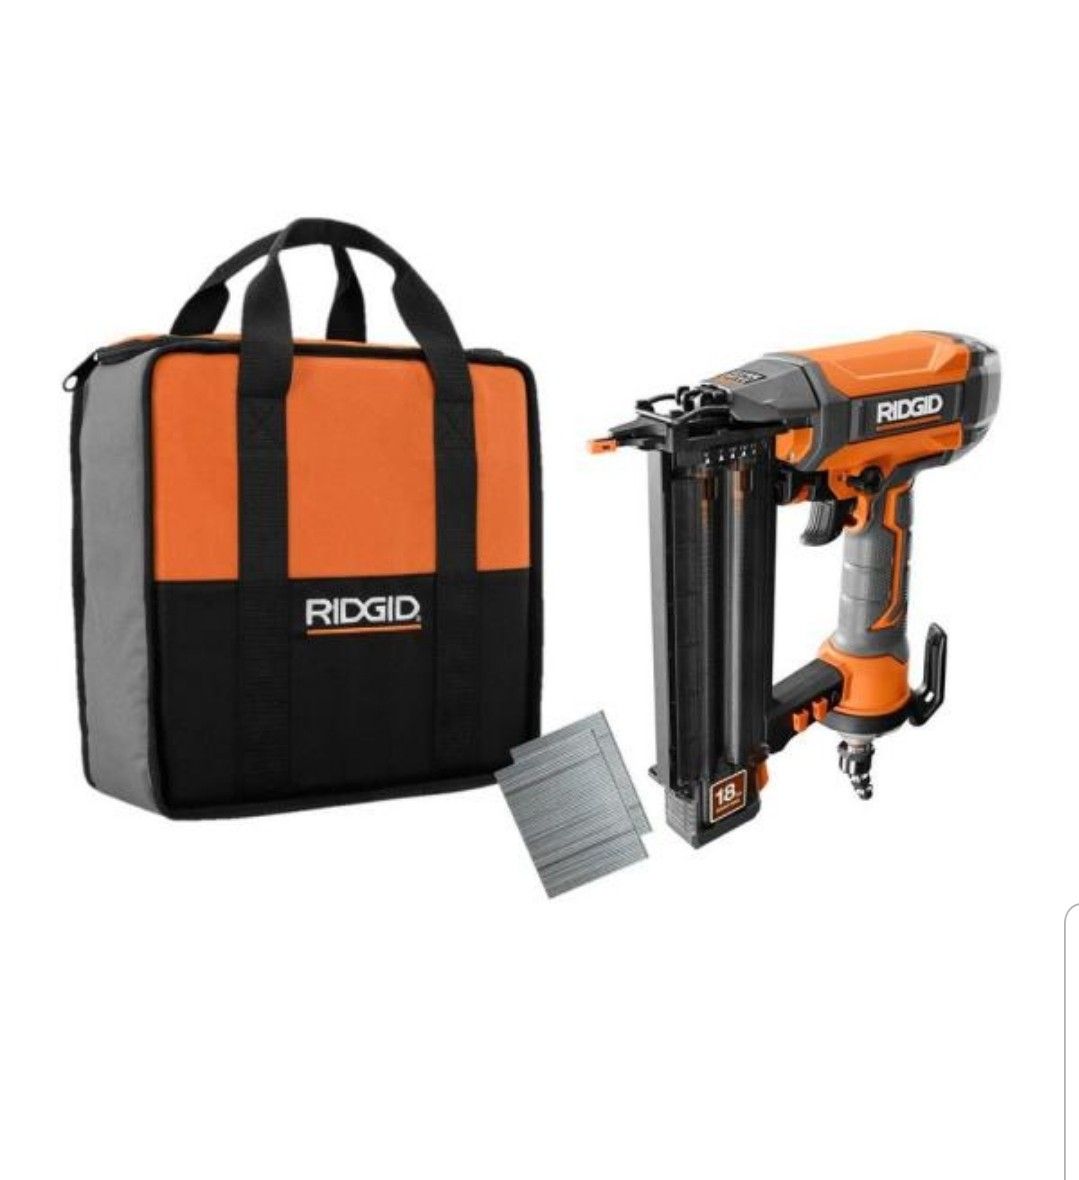 RIDGID 18-Gauge 2-1/8 in. Brad Nailer with Clean Drive Technology, Tool Bag, and Sample Nails